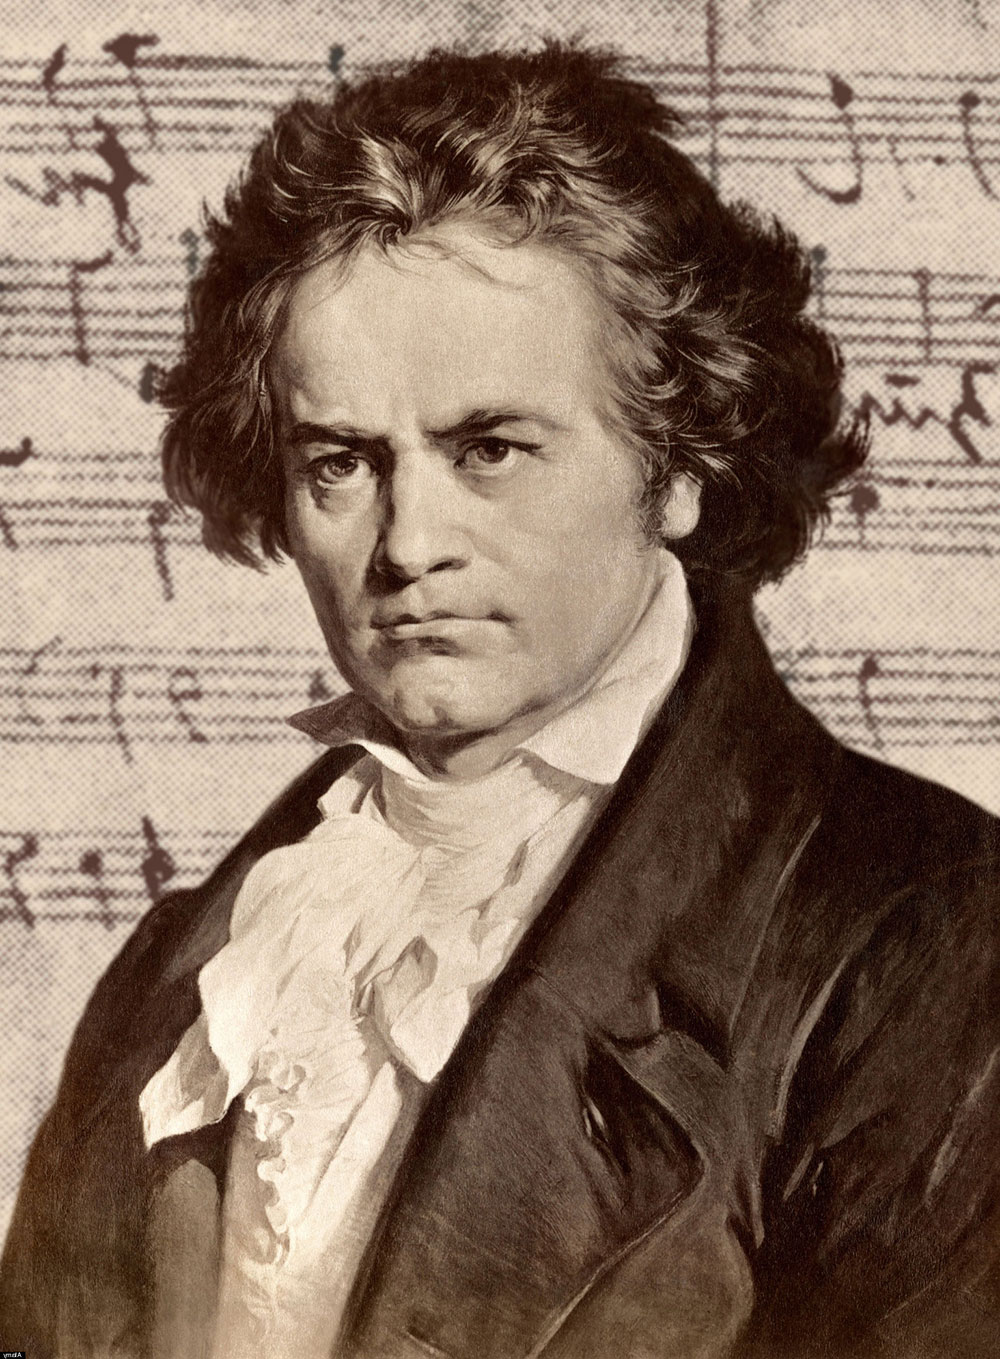 Can Beethoven temper the political tensions between US and China?
   